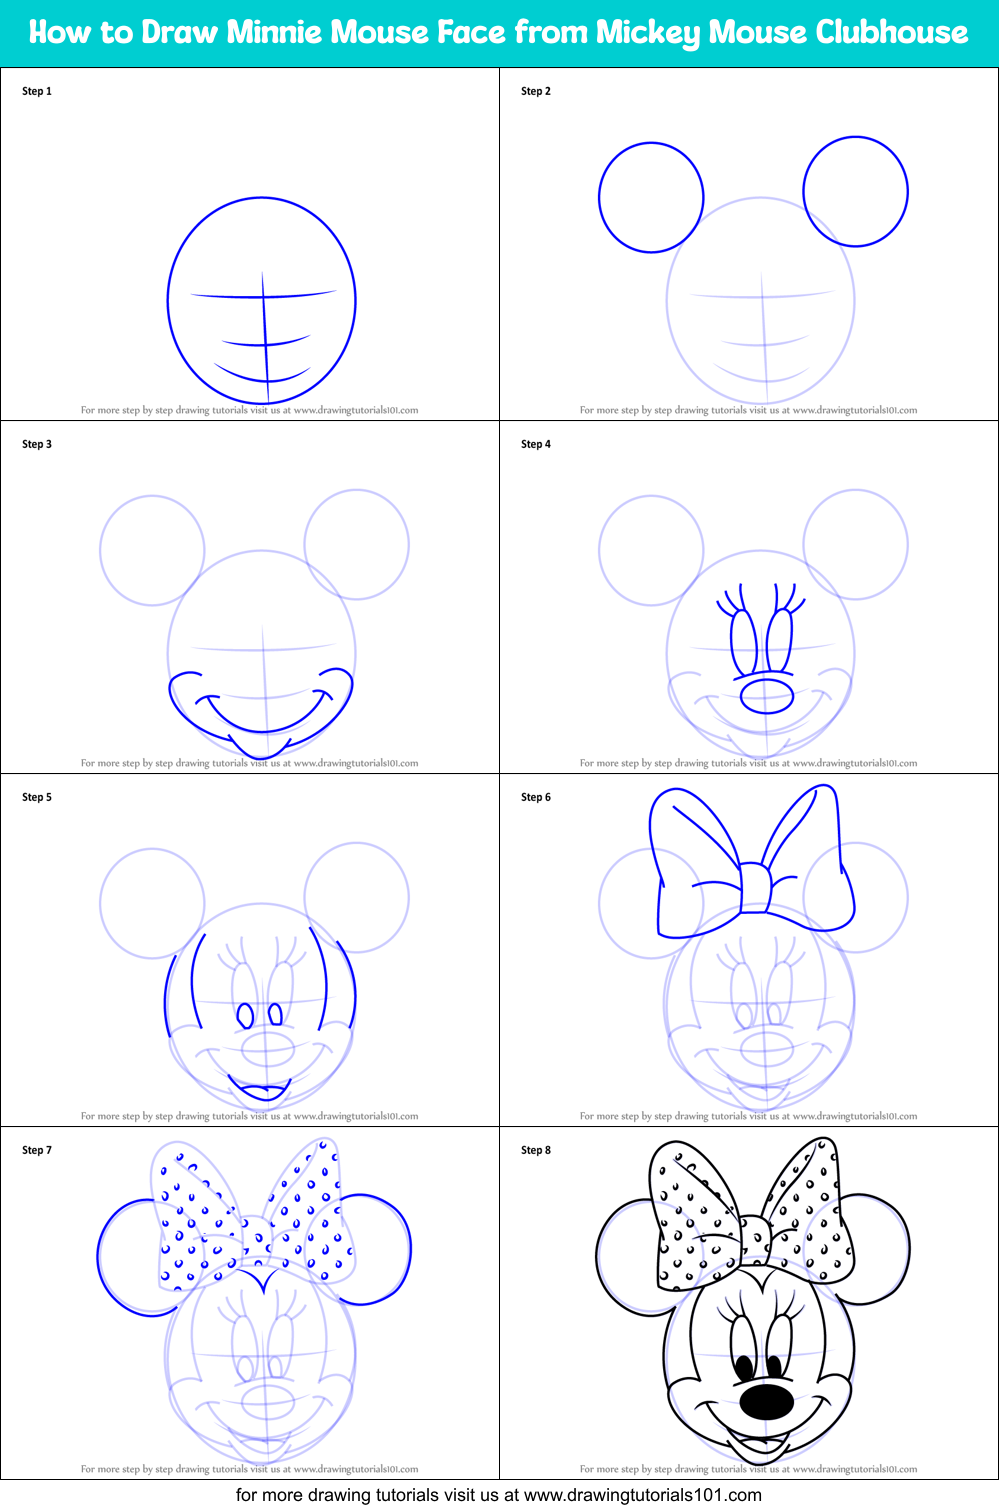 How to Draw Minnie Mouse Face from Mickey Mouse Clubhouse (Mickey Mouse